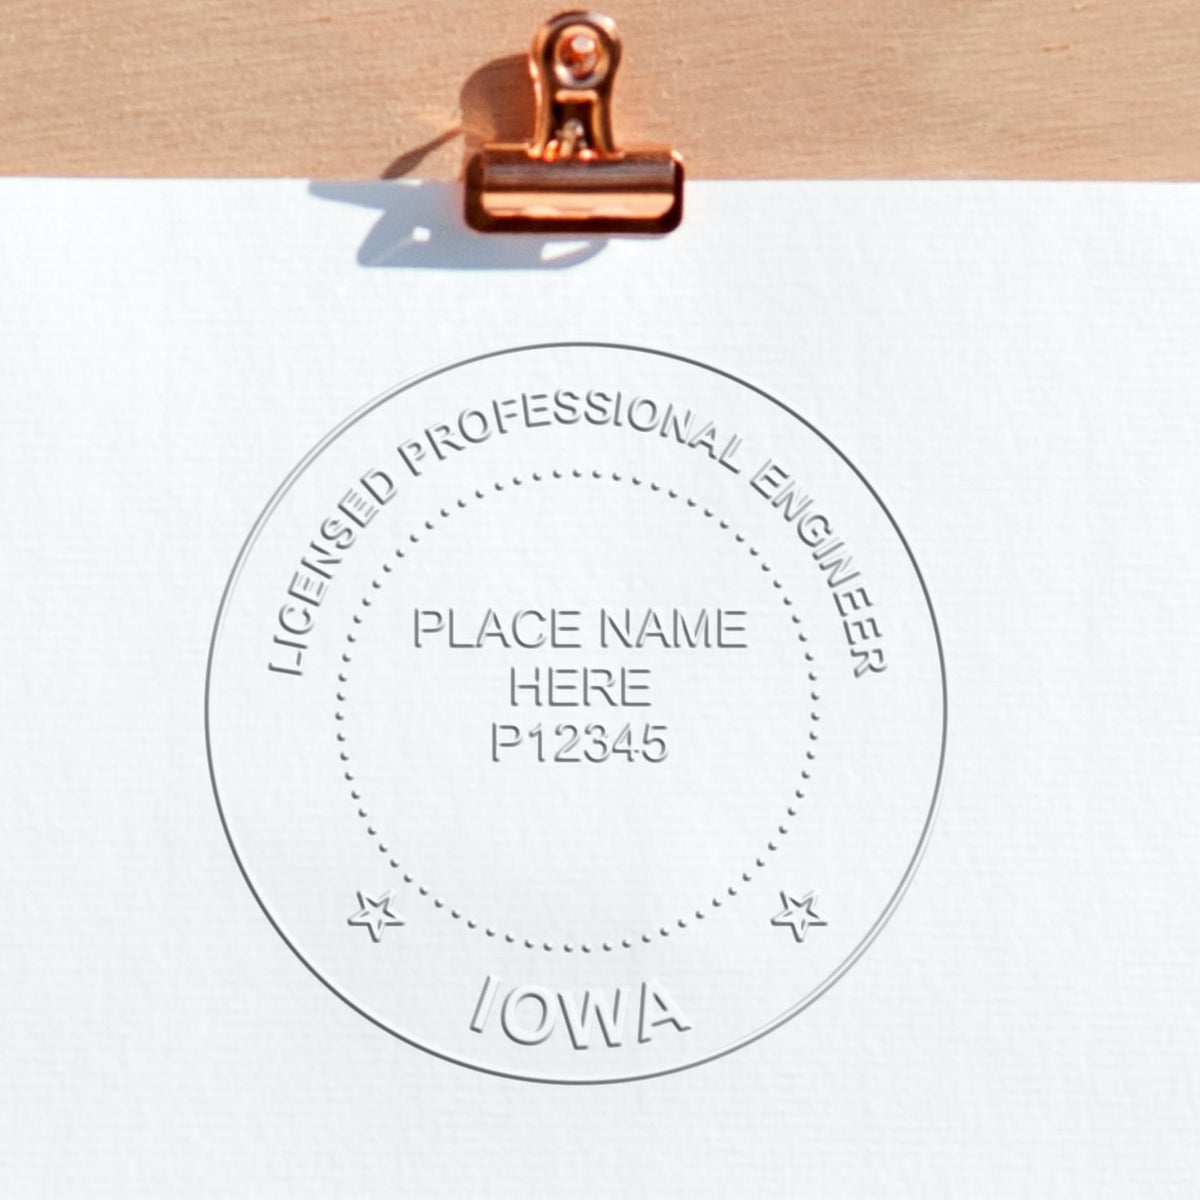 A stamped imprint of the Gift Iowa Engineer Seal in this stylish lifestyle photo, setting the tone for a unique and personalized product.